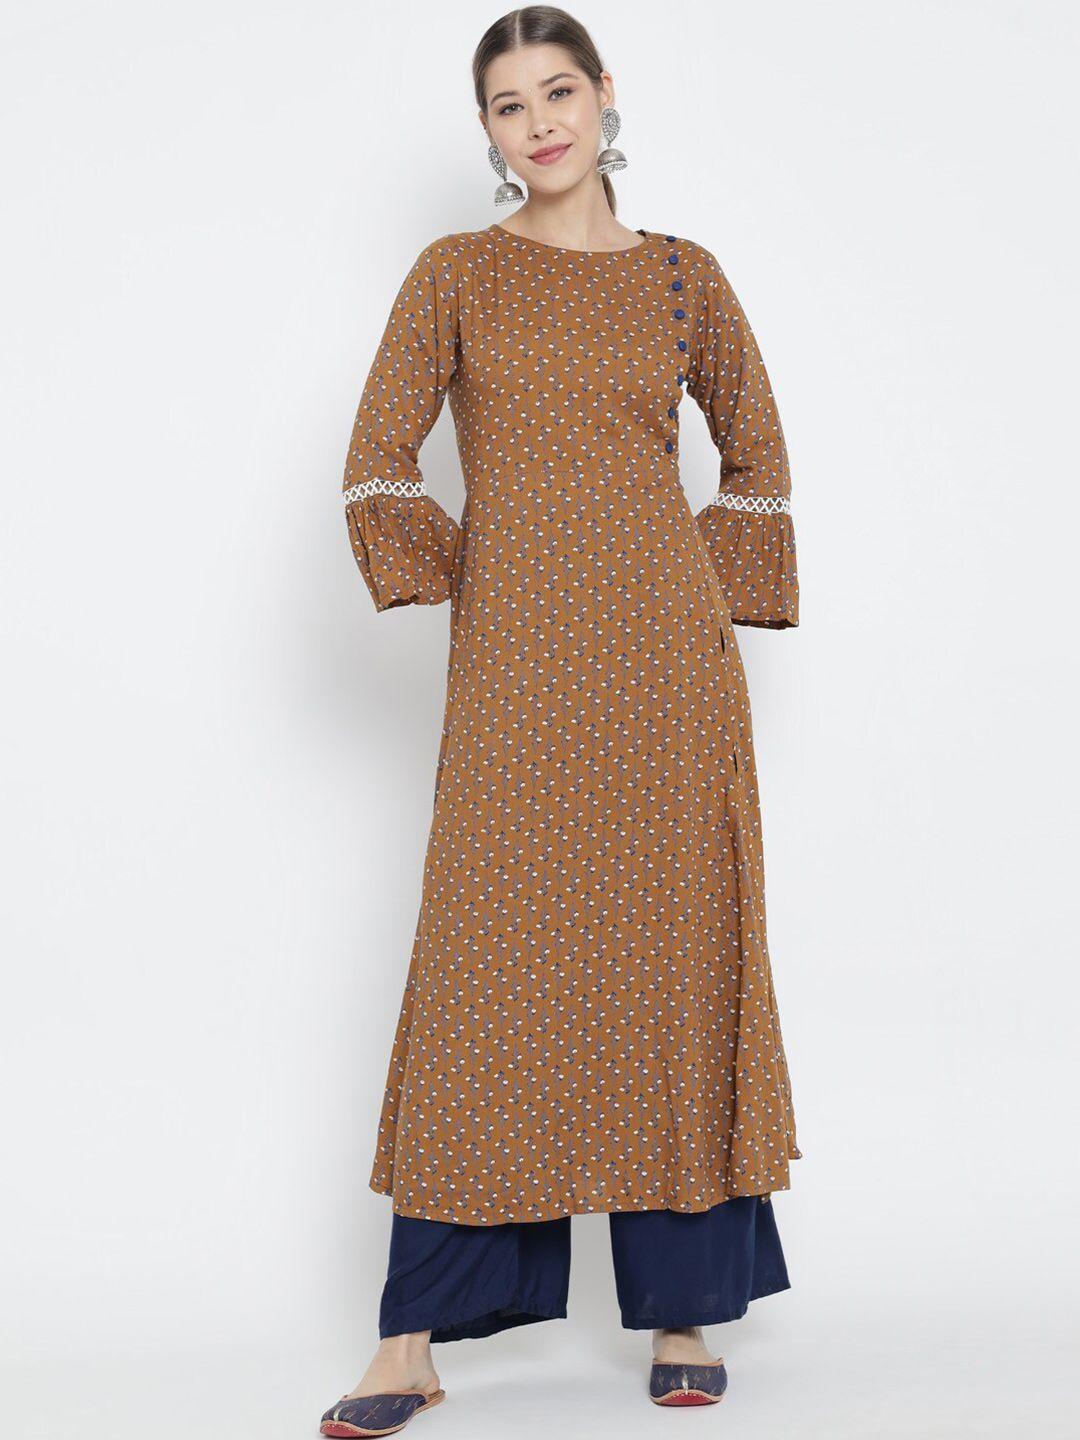 yash-gallery-brown,-blue-&-white-floral-printed-a-line-kurti